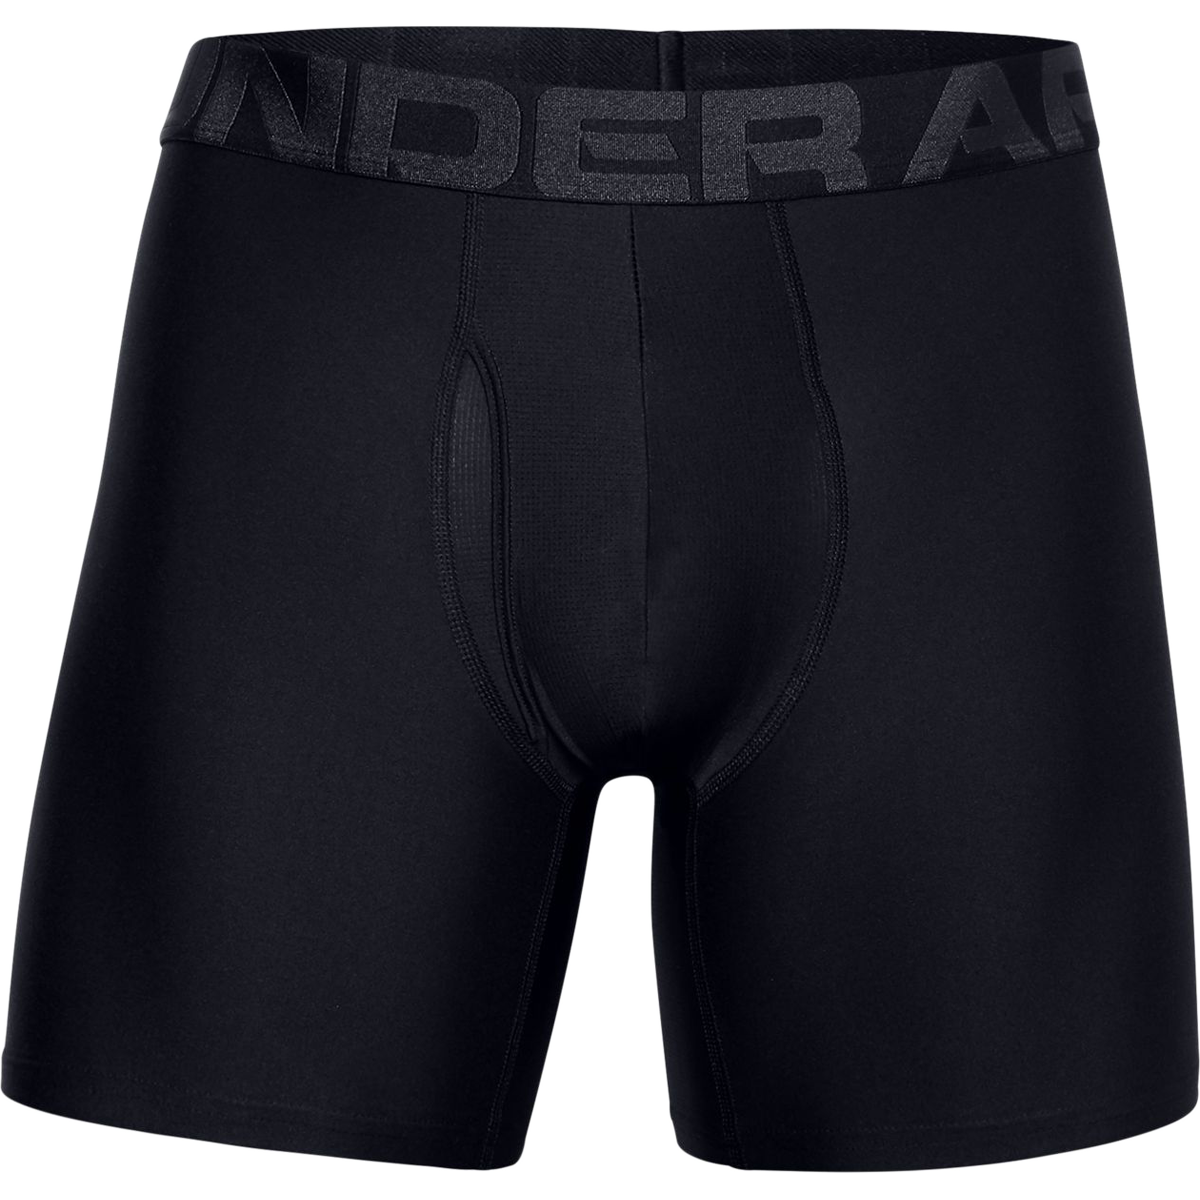 Under Armour Underwear, Charged Cotton 6, 3-Pack, Mens - Time-Out